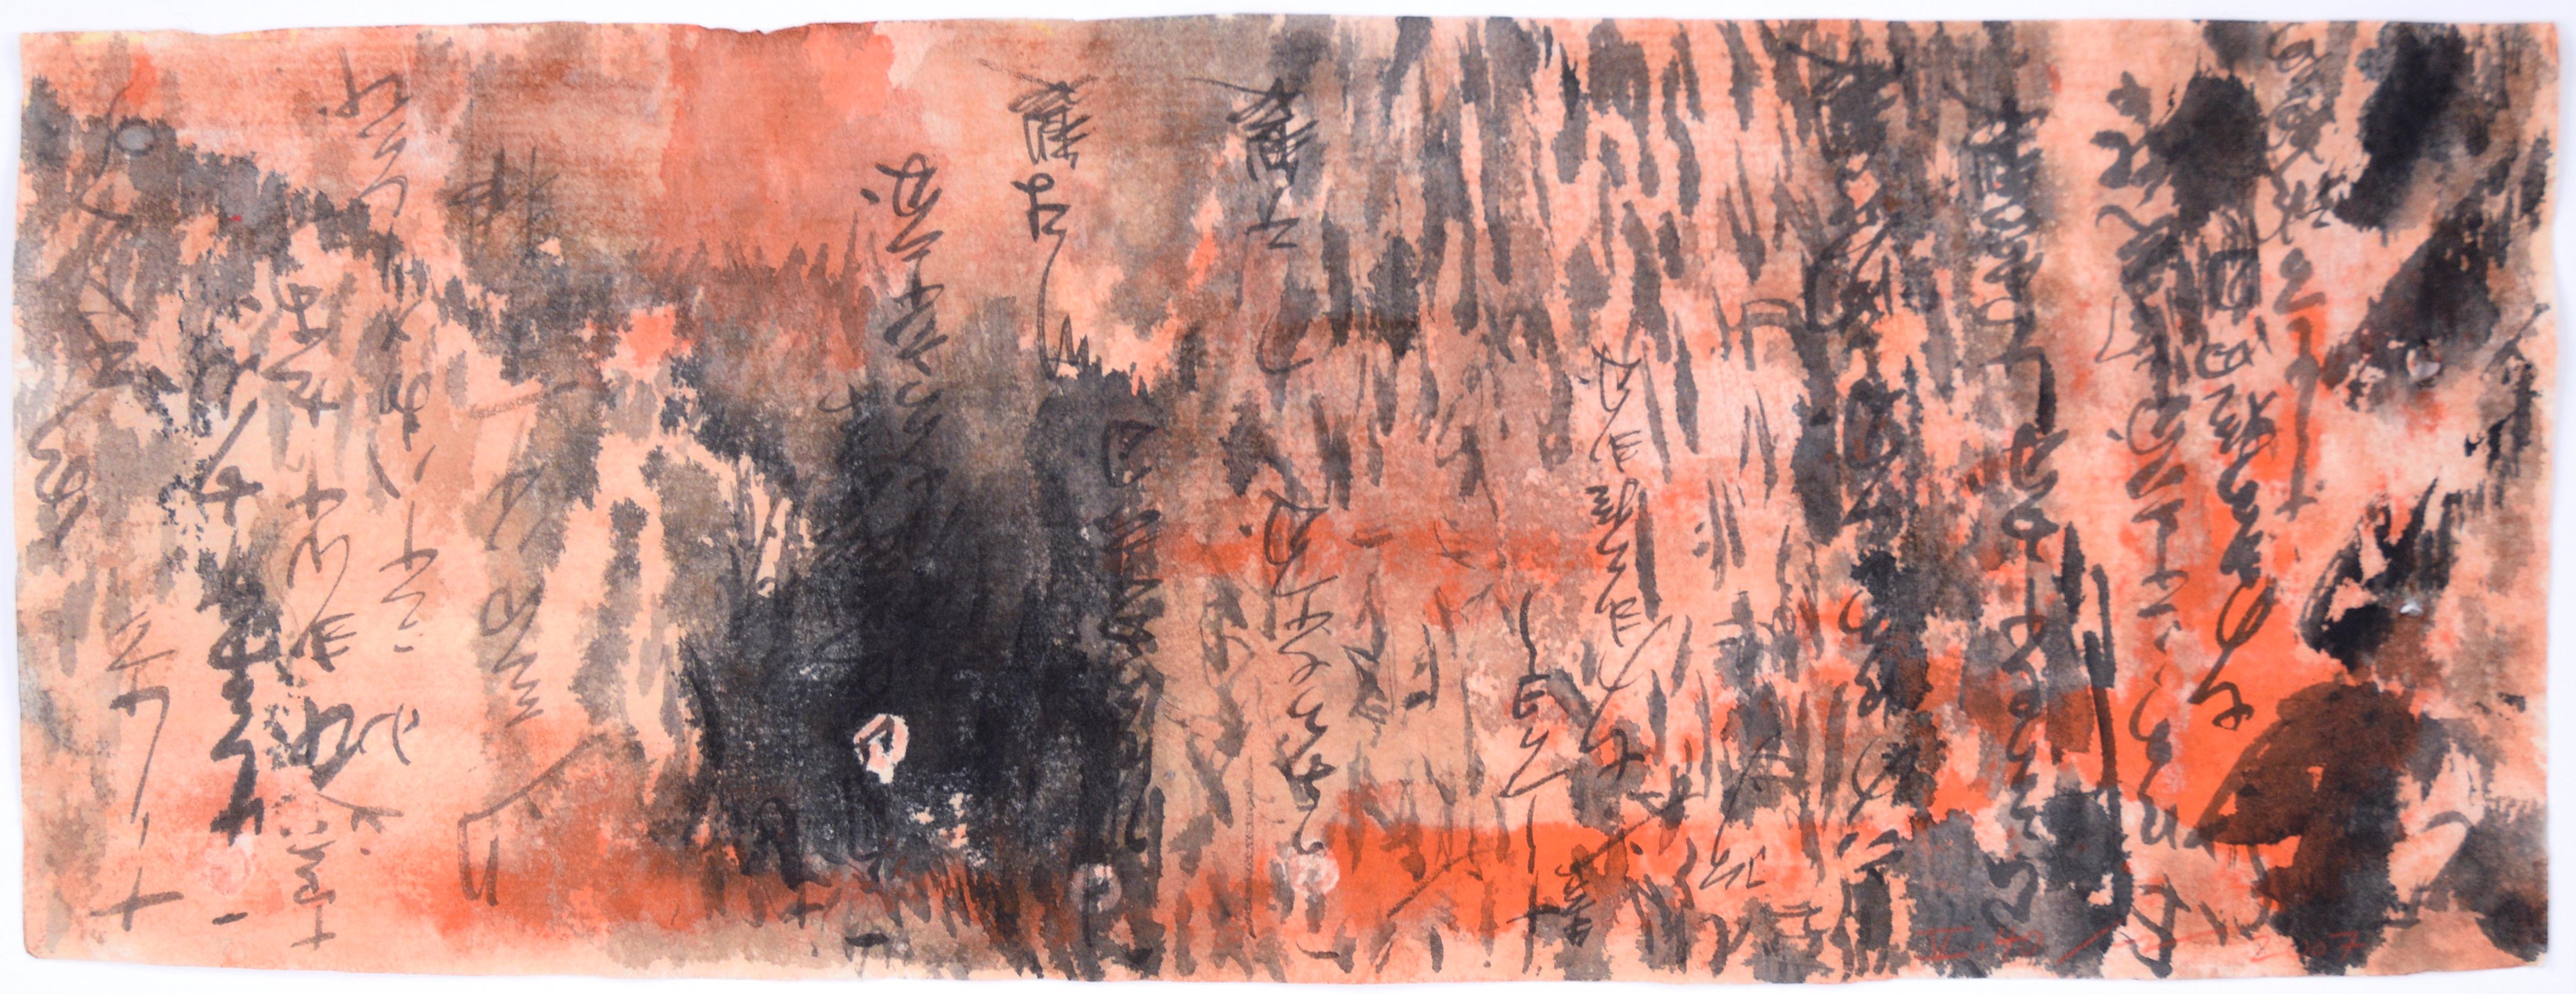 Calligraphy Abstract Panorama IV - Japanese Calligraphy on Rice Paper - Painting by Michael Pauker 